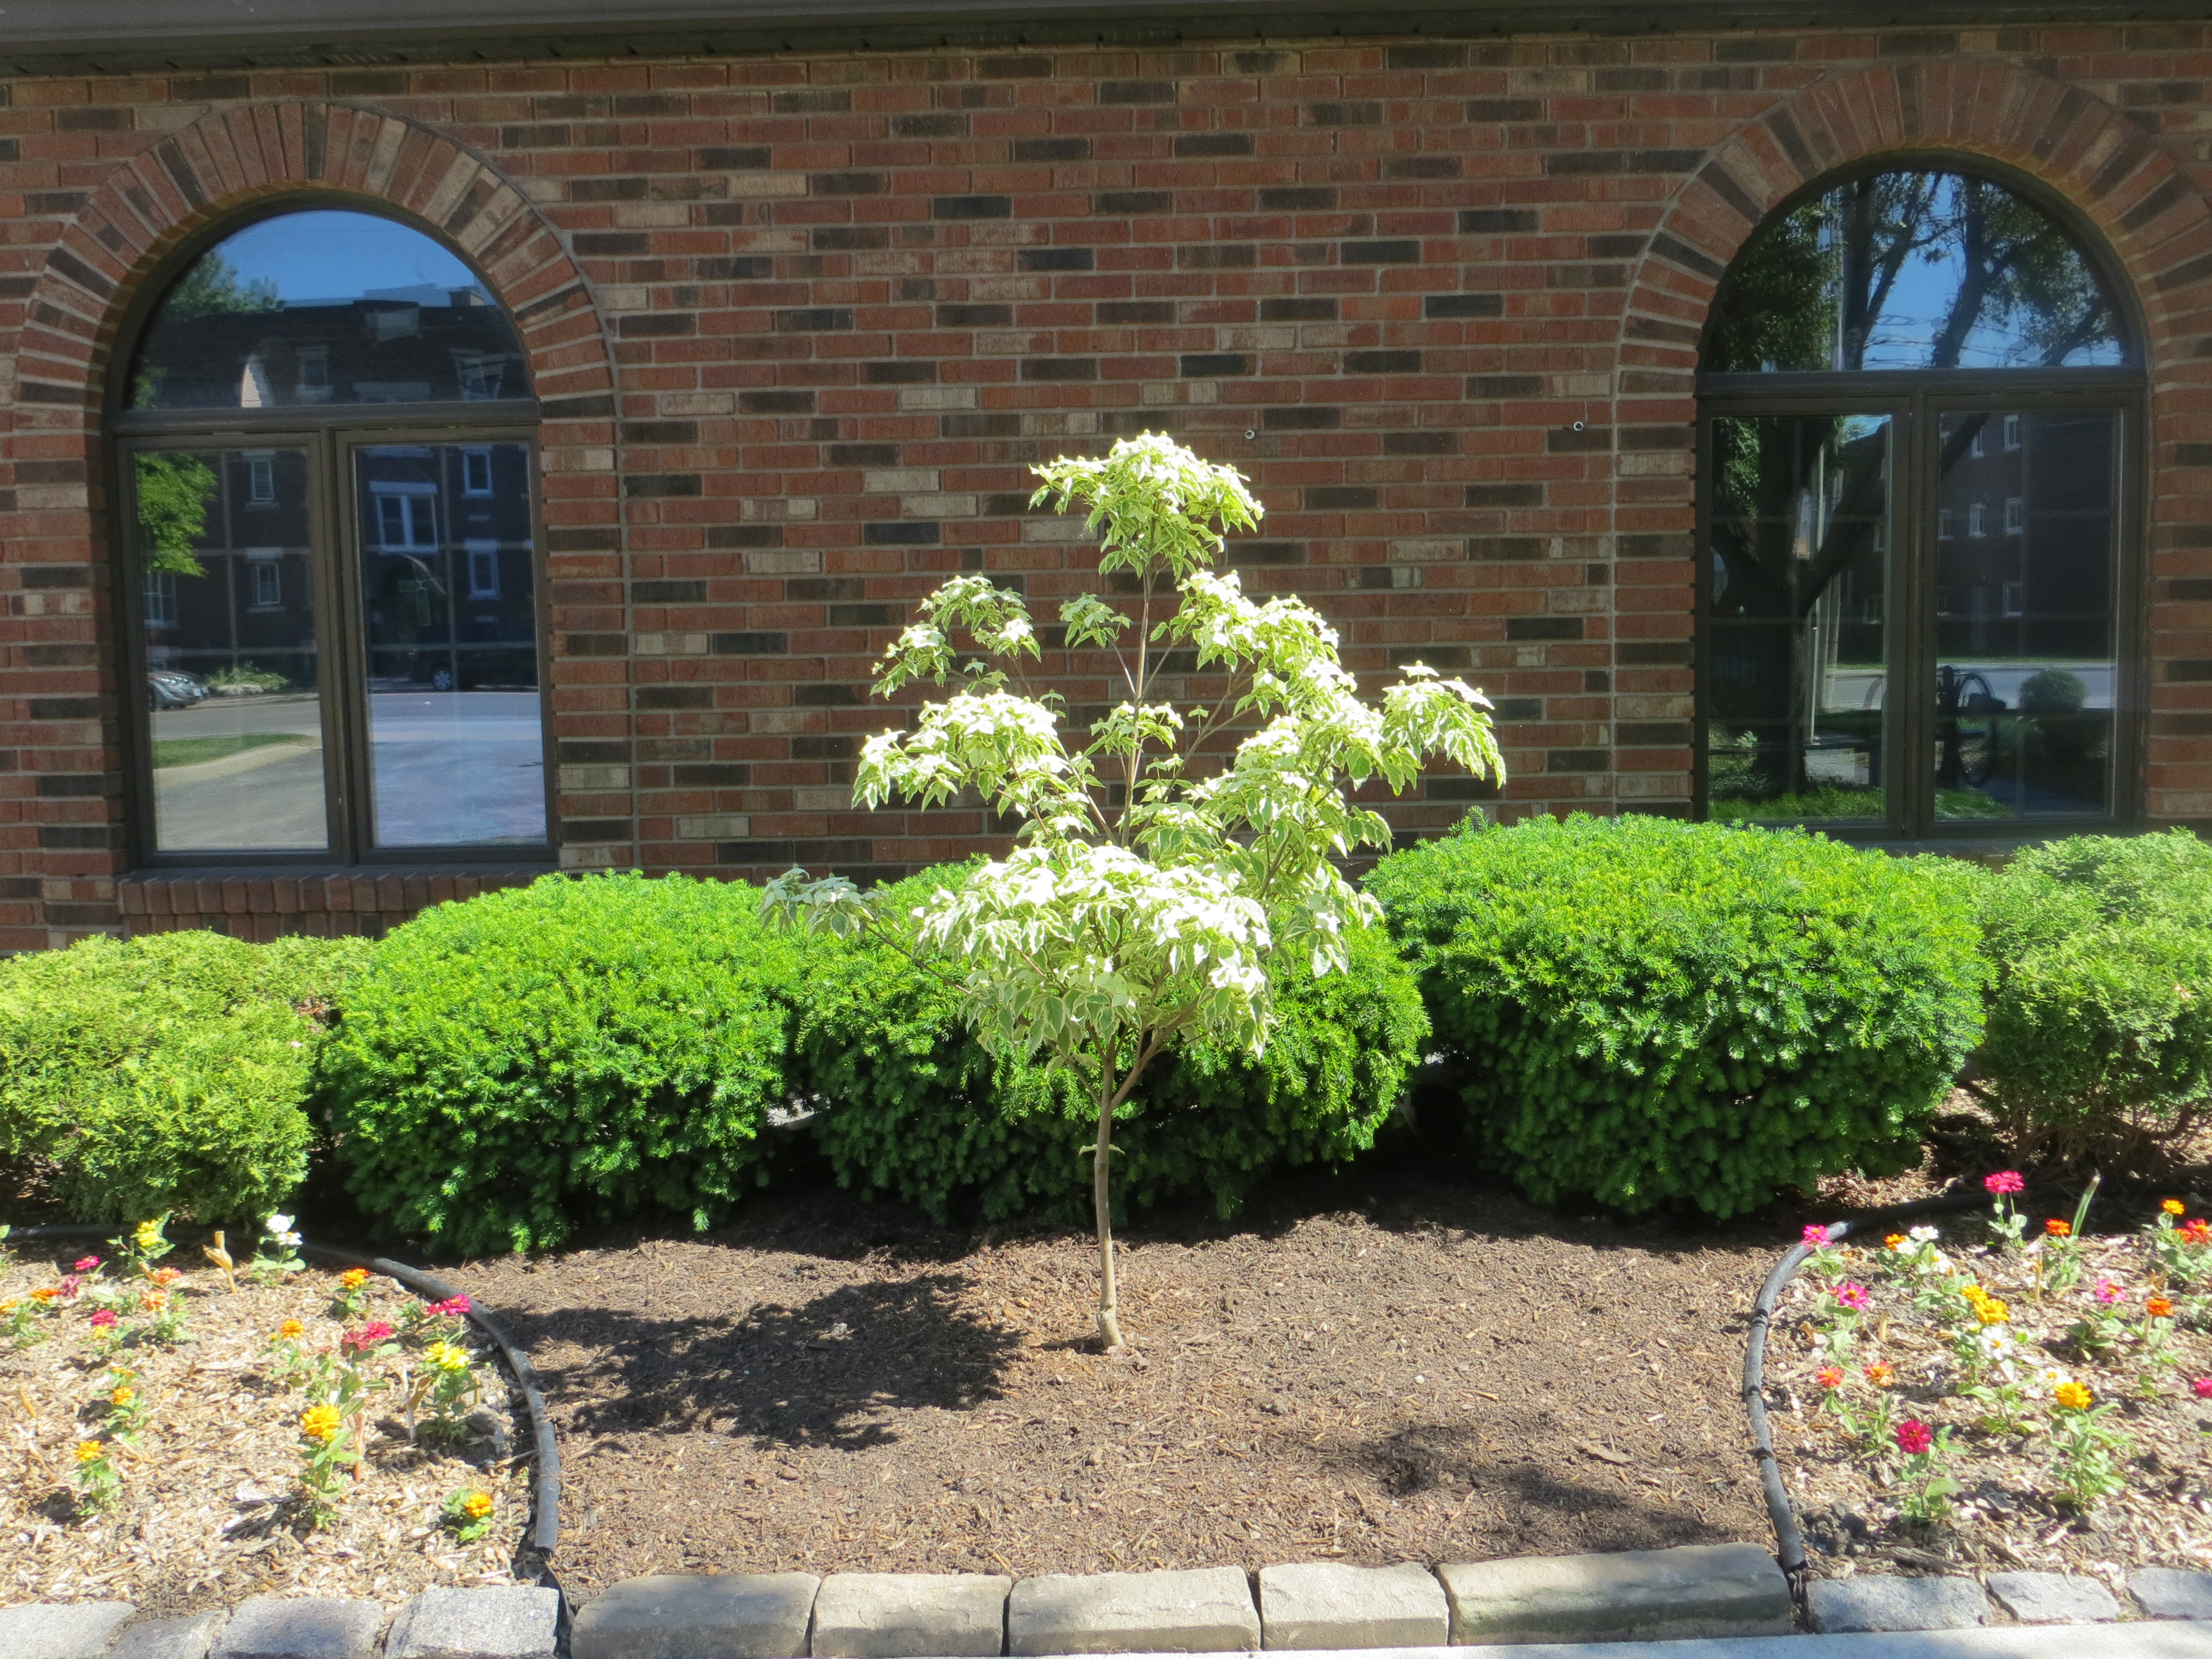 Samaritan Dogwood planted in honour of Archdeacon Ron's 90th birthday - June 8/20